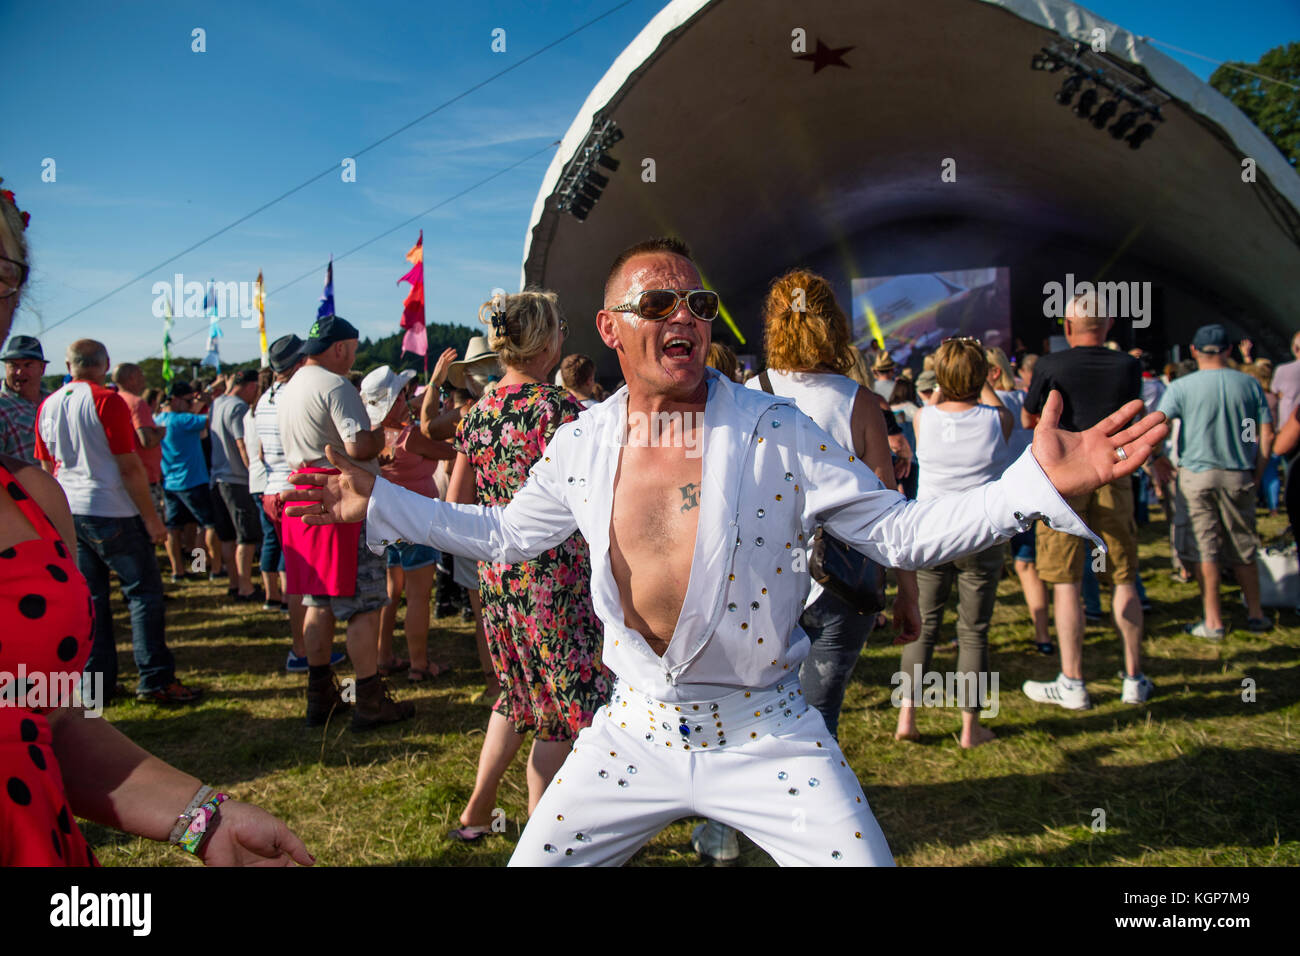 An Elvis Presley look-alike  at the Big Tribute music festival, held on the outskirts of Aberystwyth Wales on August Bank Holiday weekend 2017. The fetsival showcases covers acts and tribute bands and attracts thousands of fans from all over the UK Stock Photo